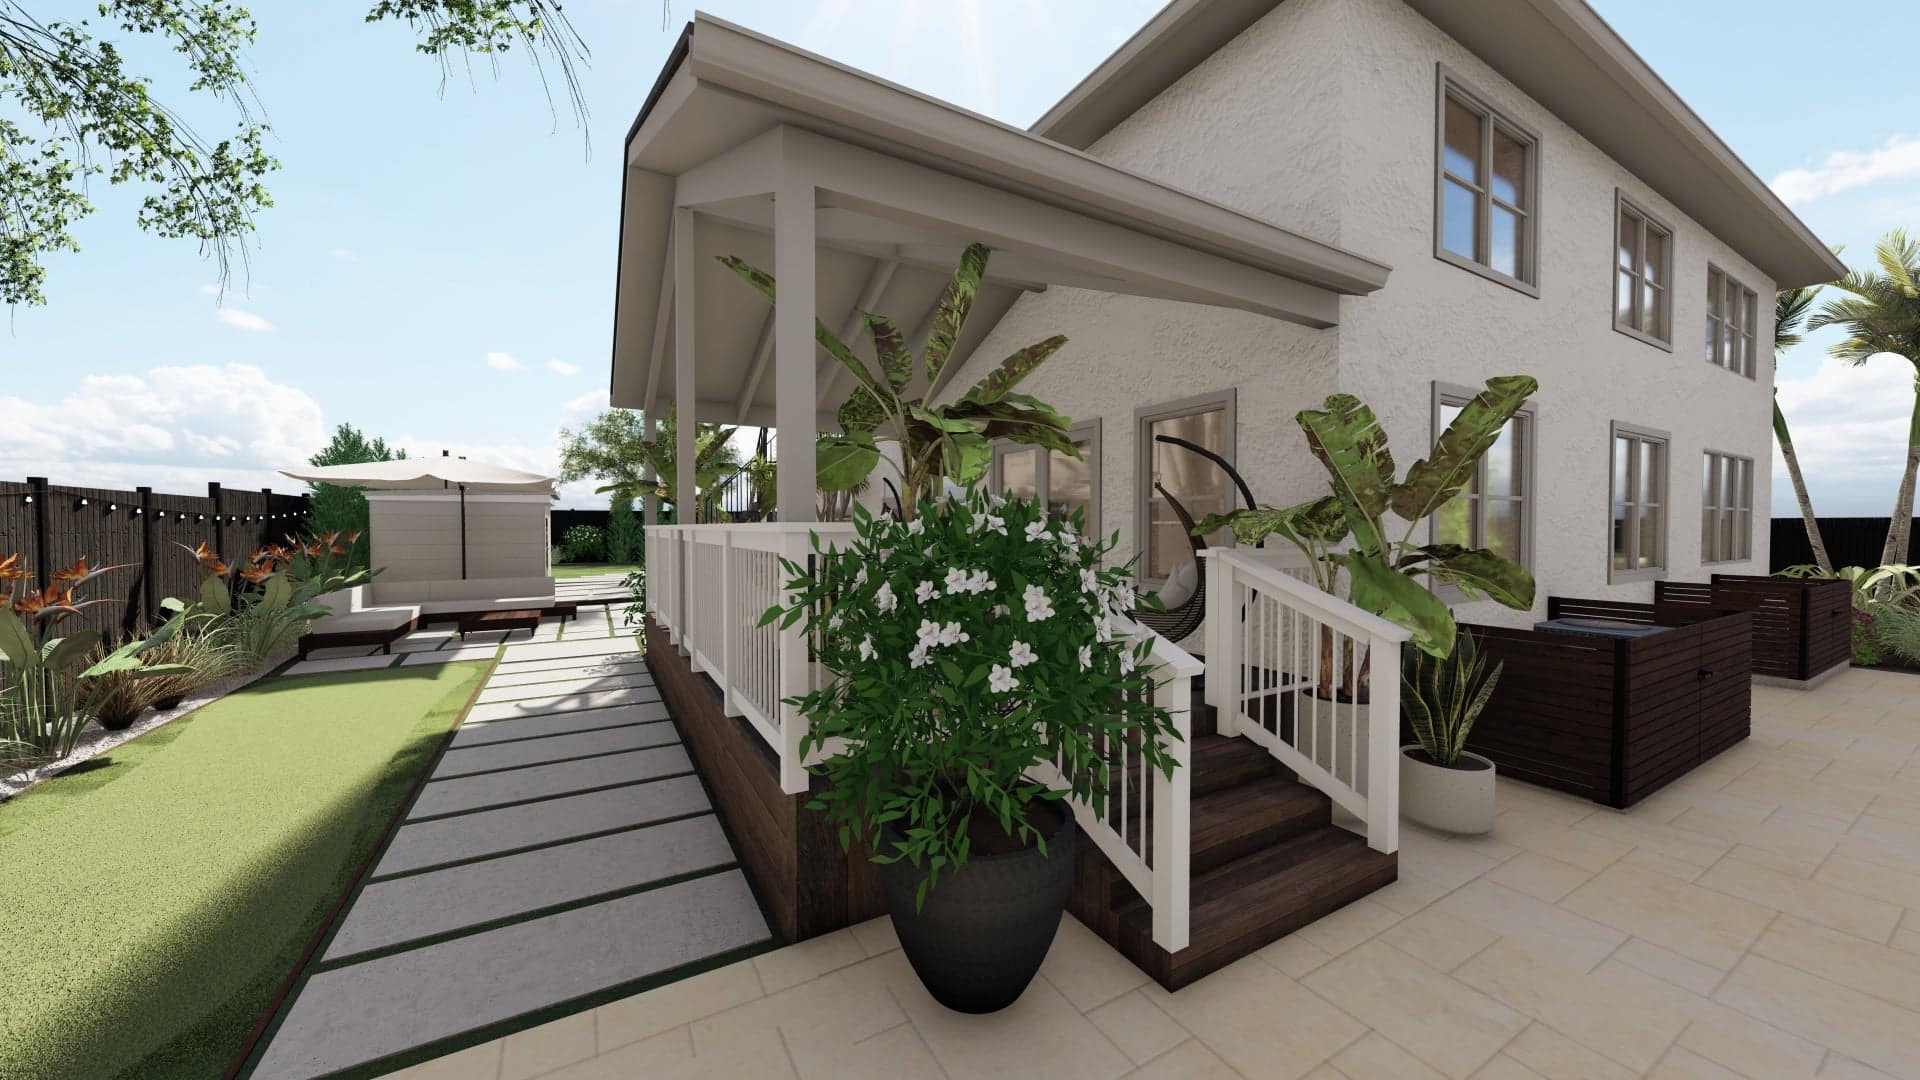 3D design render of side yard with concrete stepper path and tropical plants